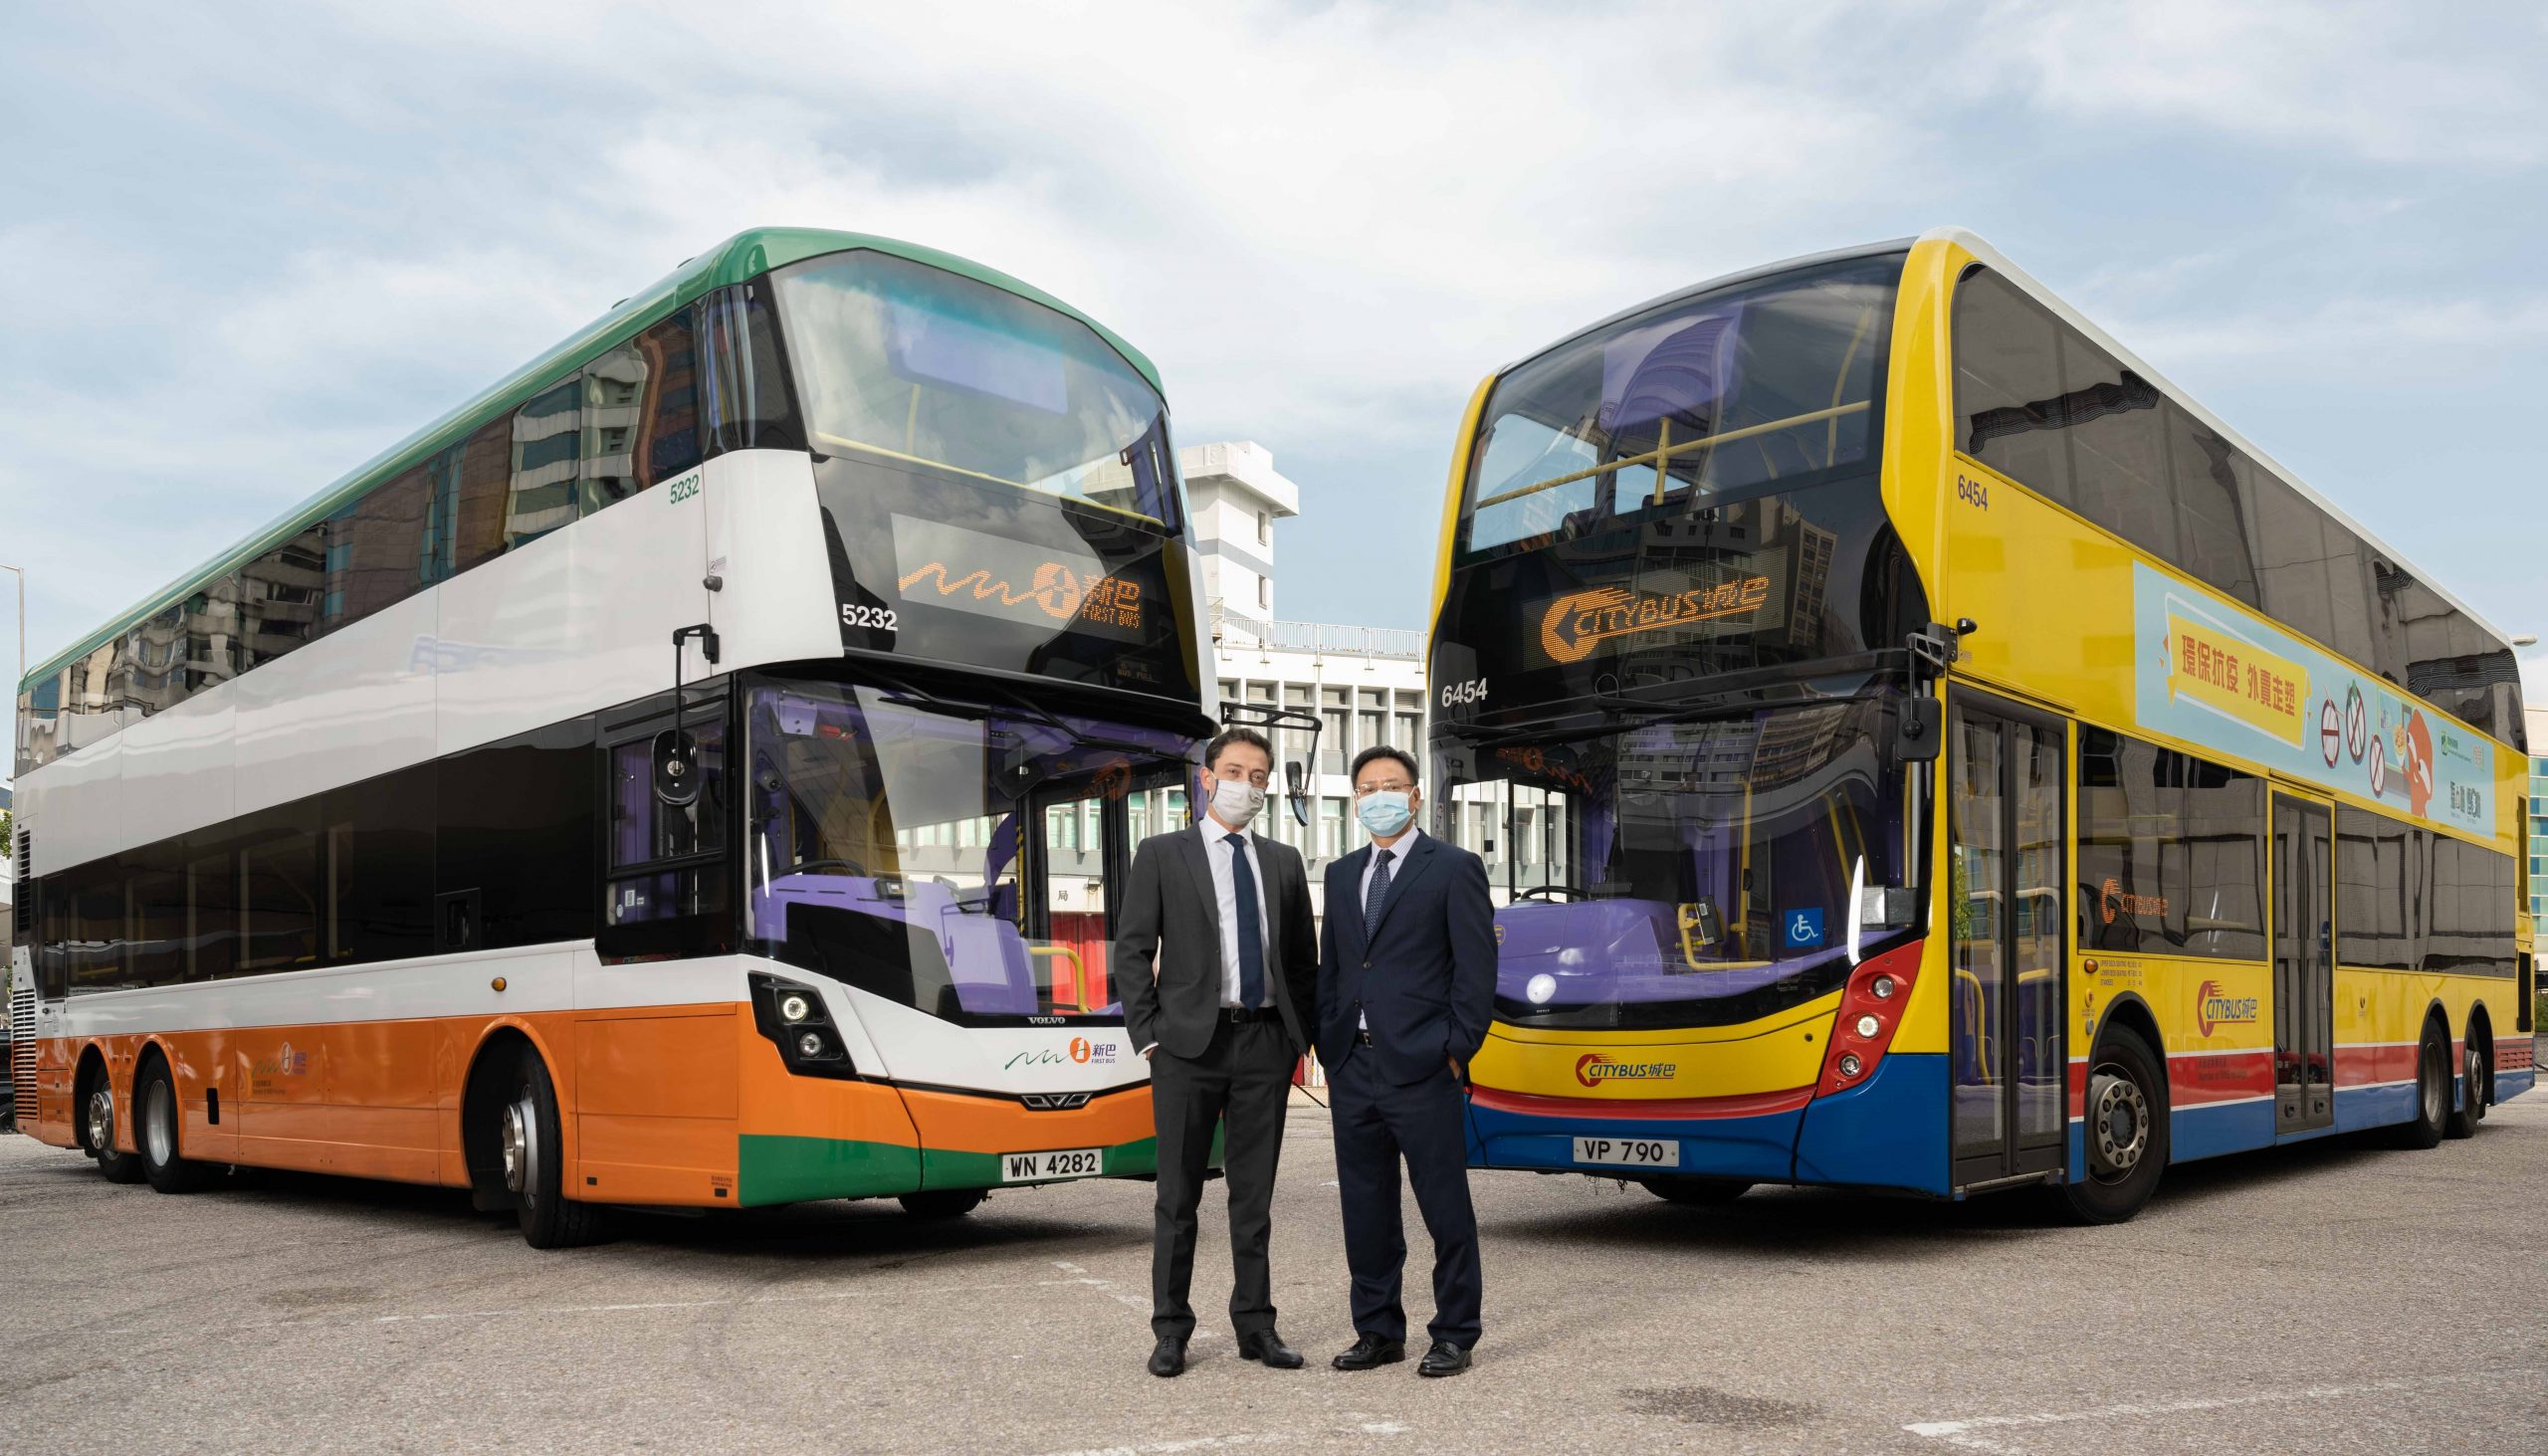 Templewater buy Citybus and NWFB